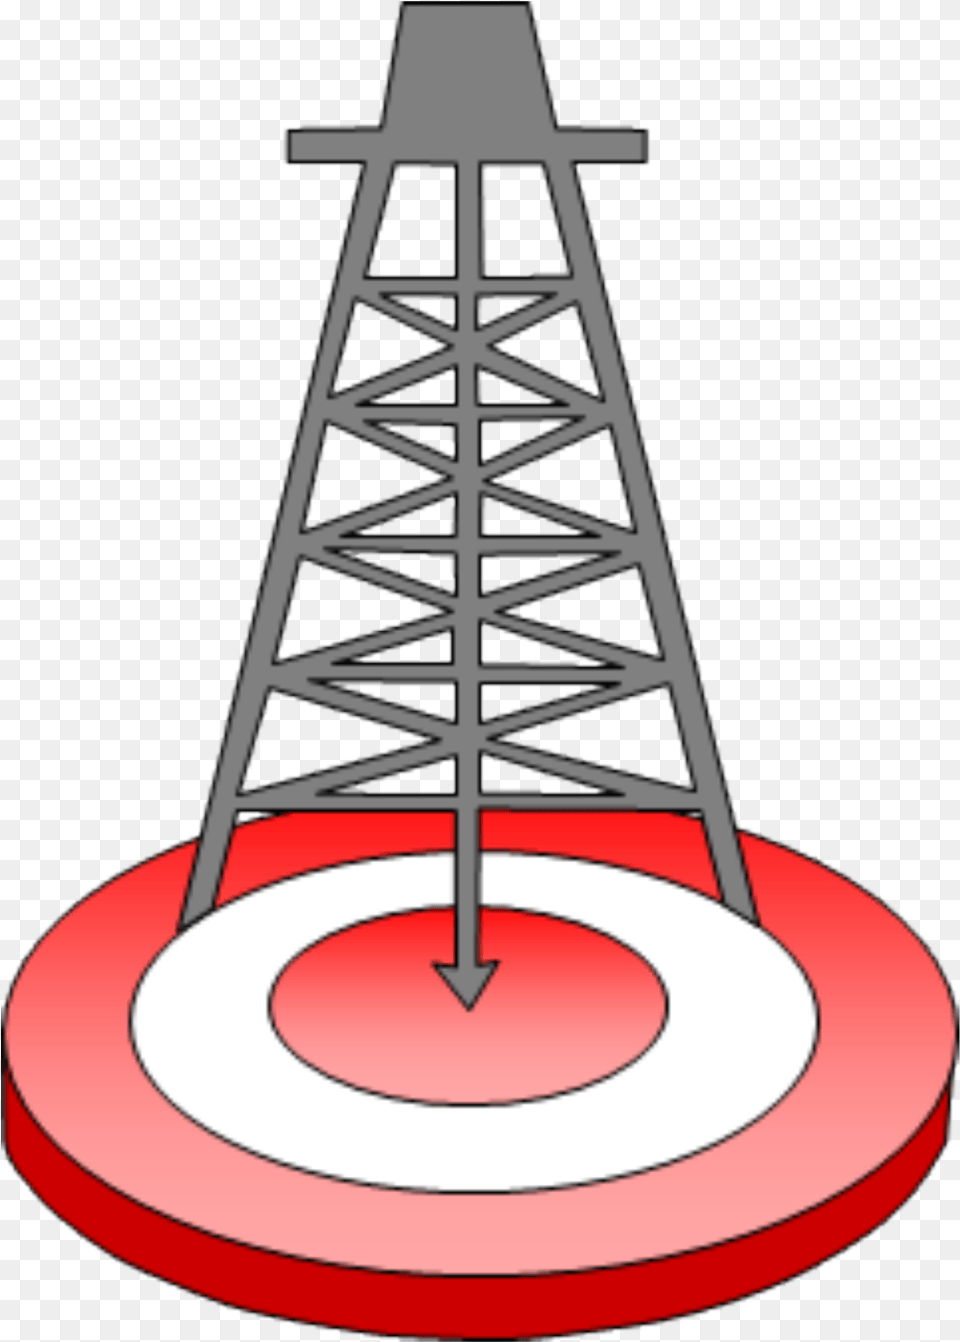 Pumping Gas Clipart New Century Exploration Logo, Cable, Power Lines, Electric Transmission Tower, Cross Free Png